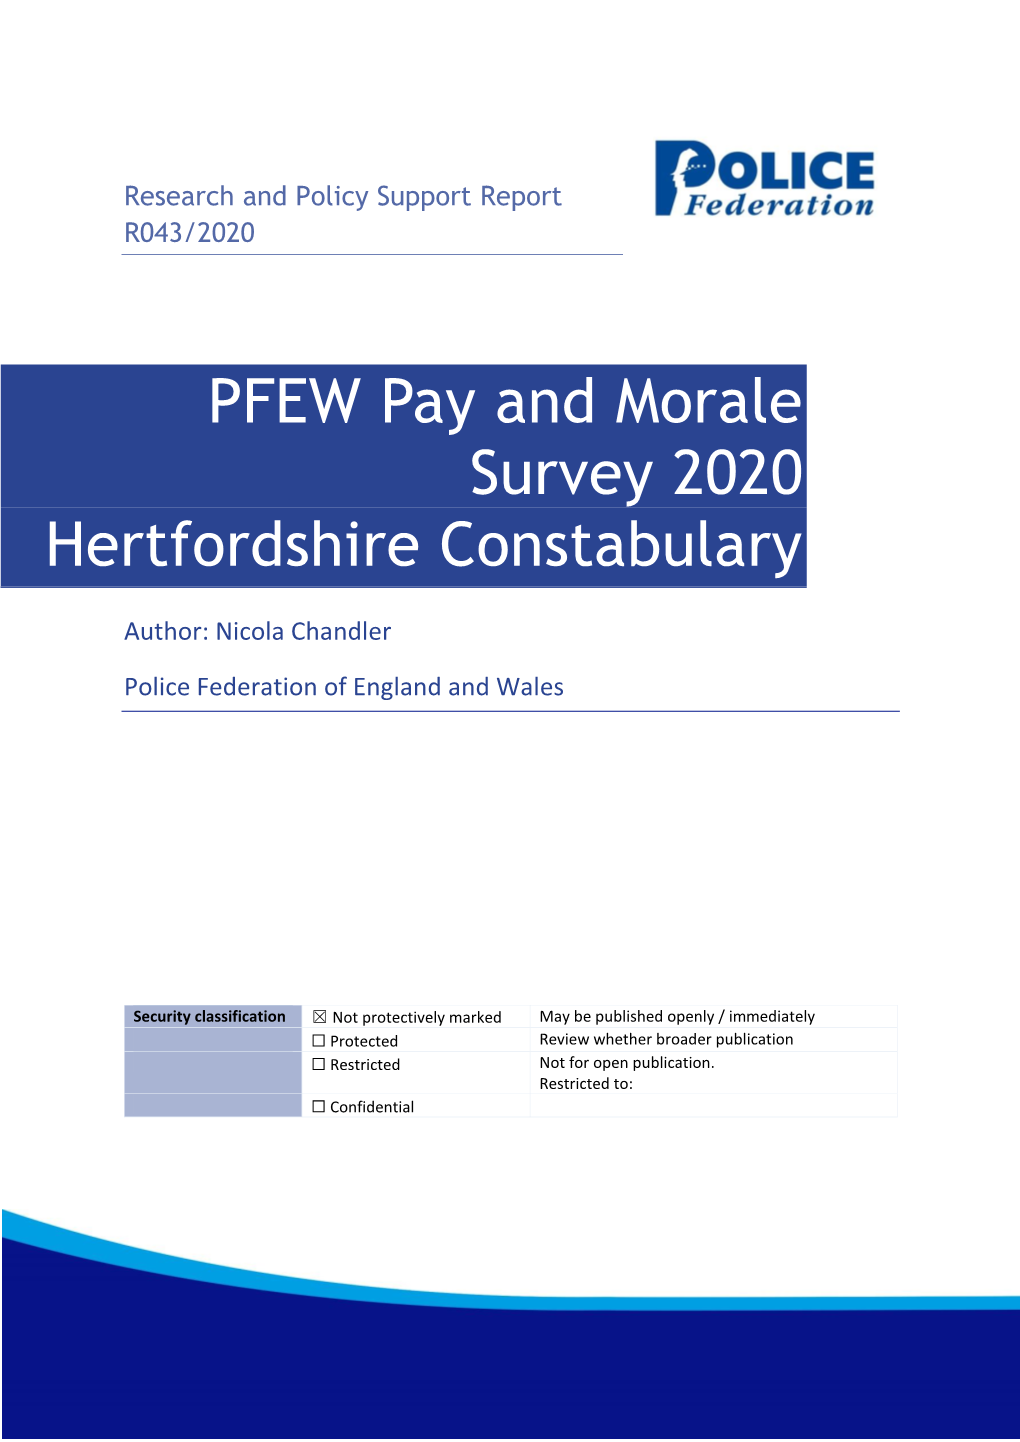 PFEW Pay and Morale Survey 2020 Hertfordshire Constabulary